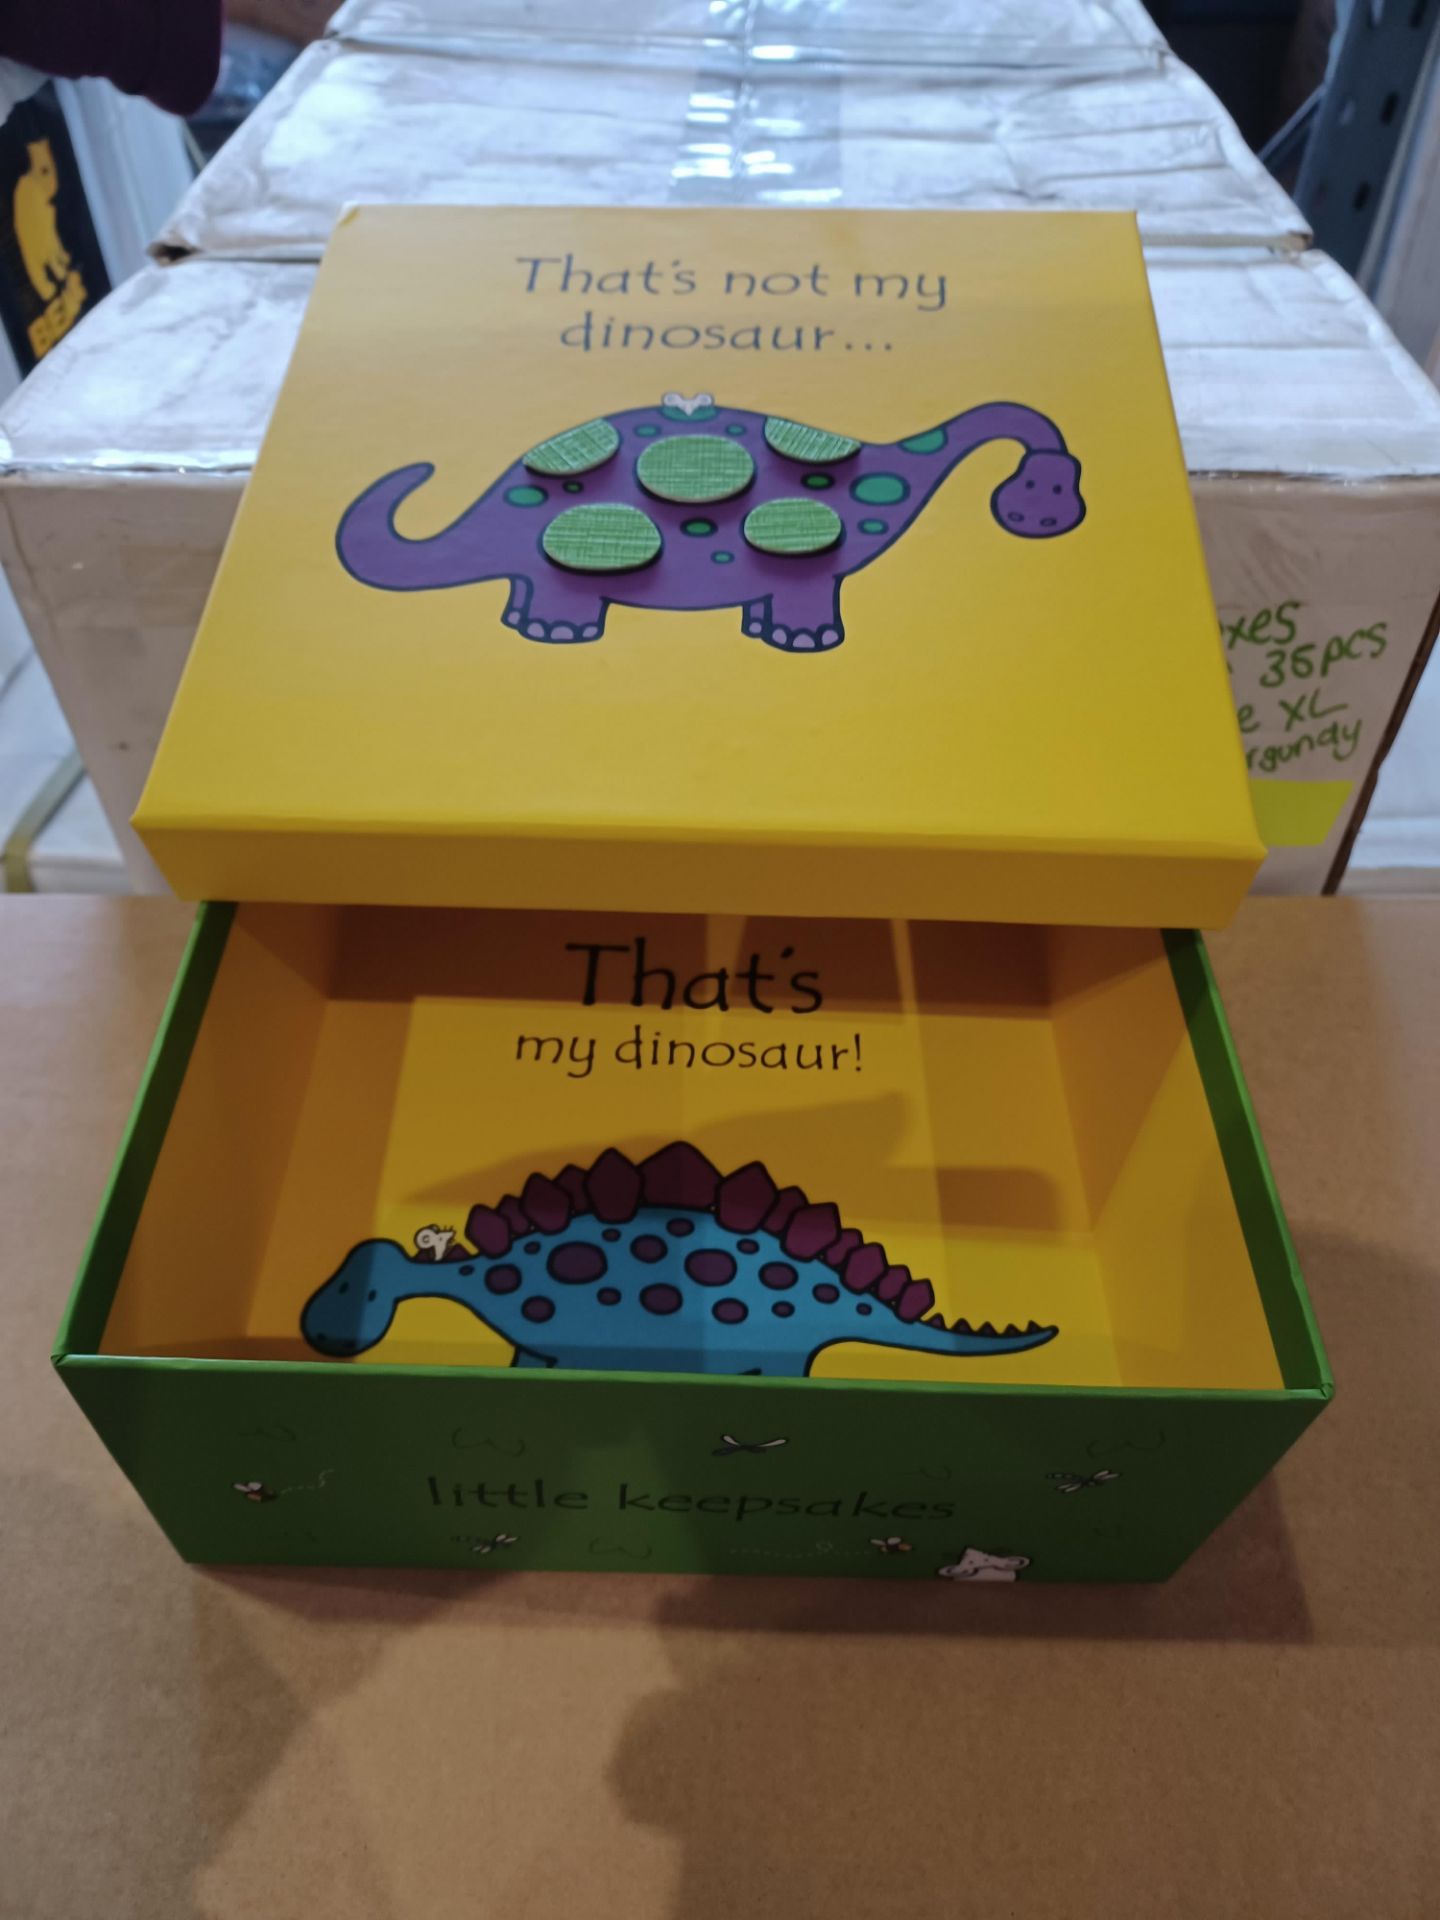 20 X BRAND NEW OFFICIAL THAT’S NOT MY DINOSAUR KEEPSAKE BOXES R16-3